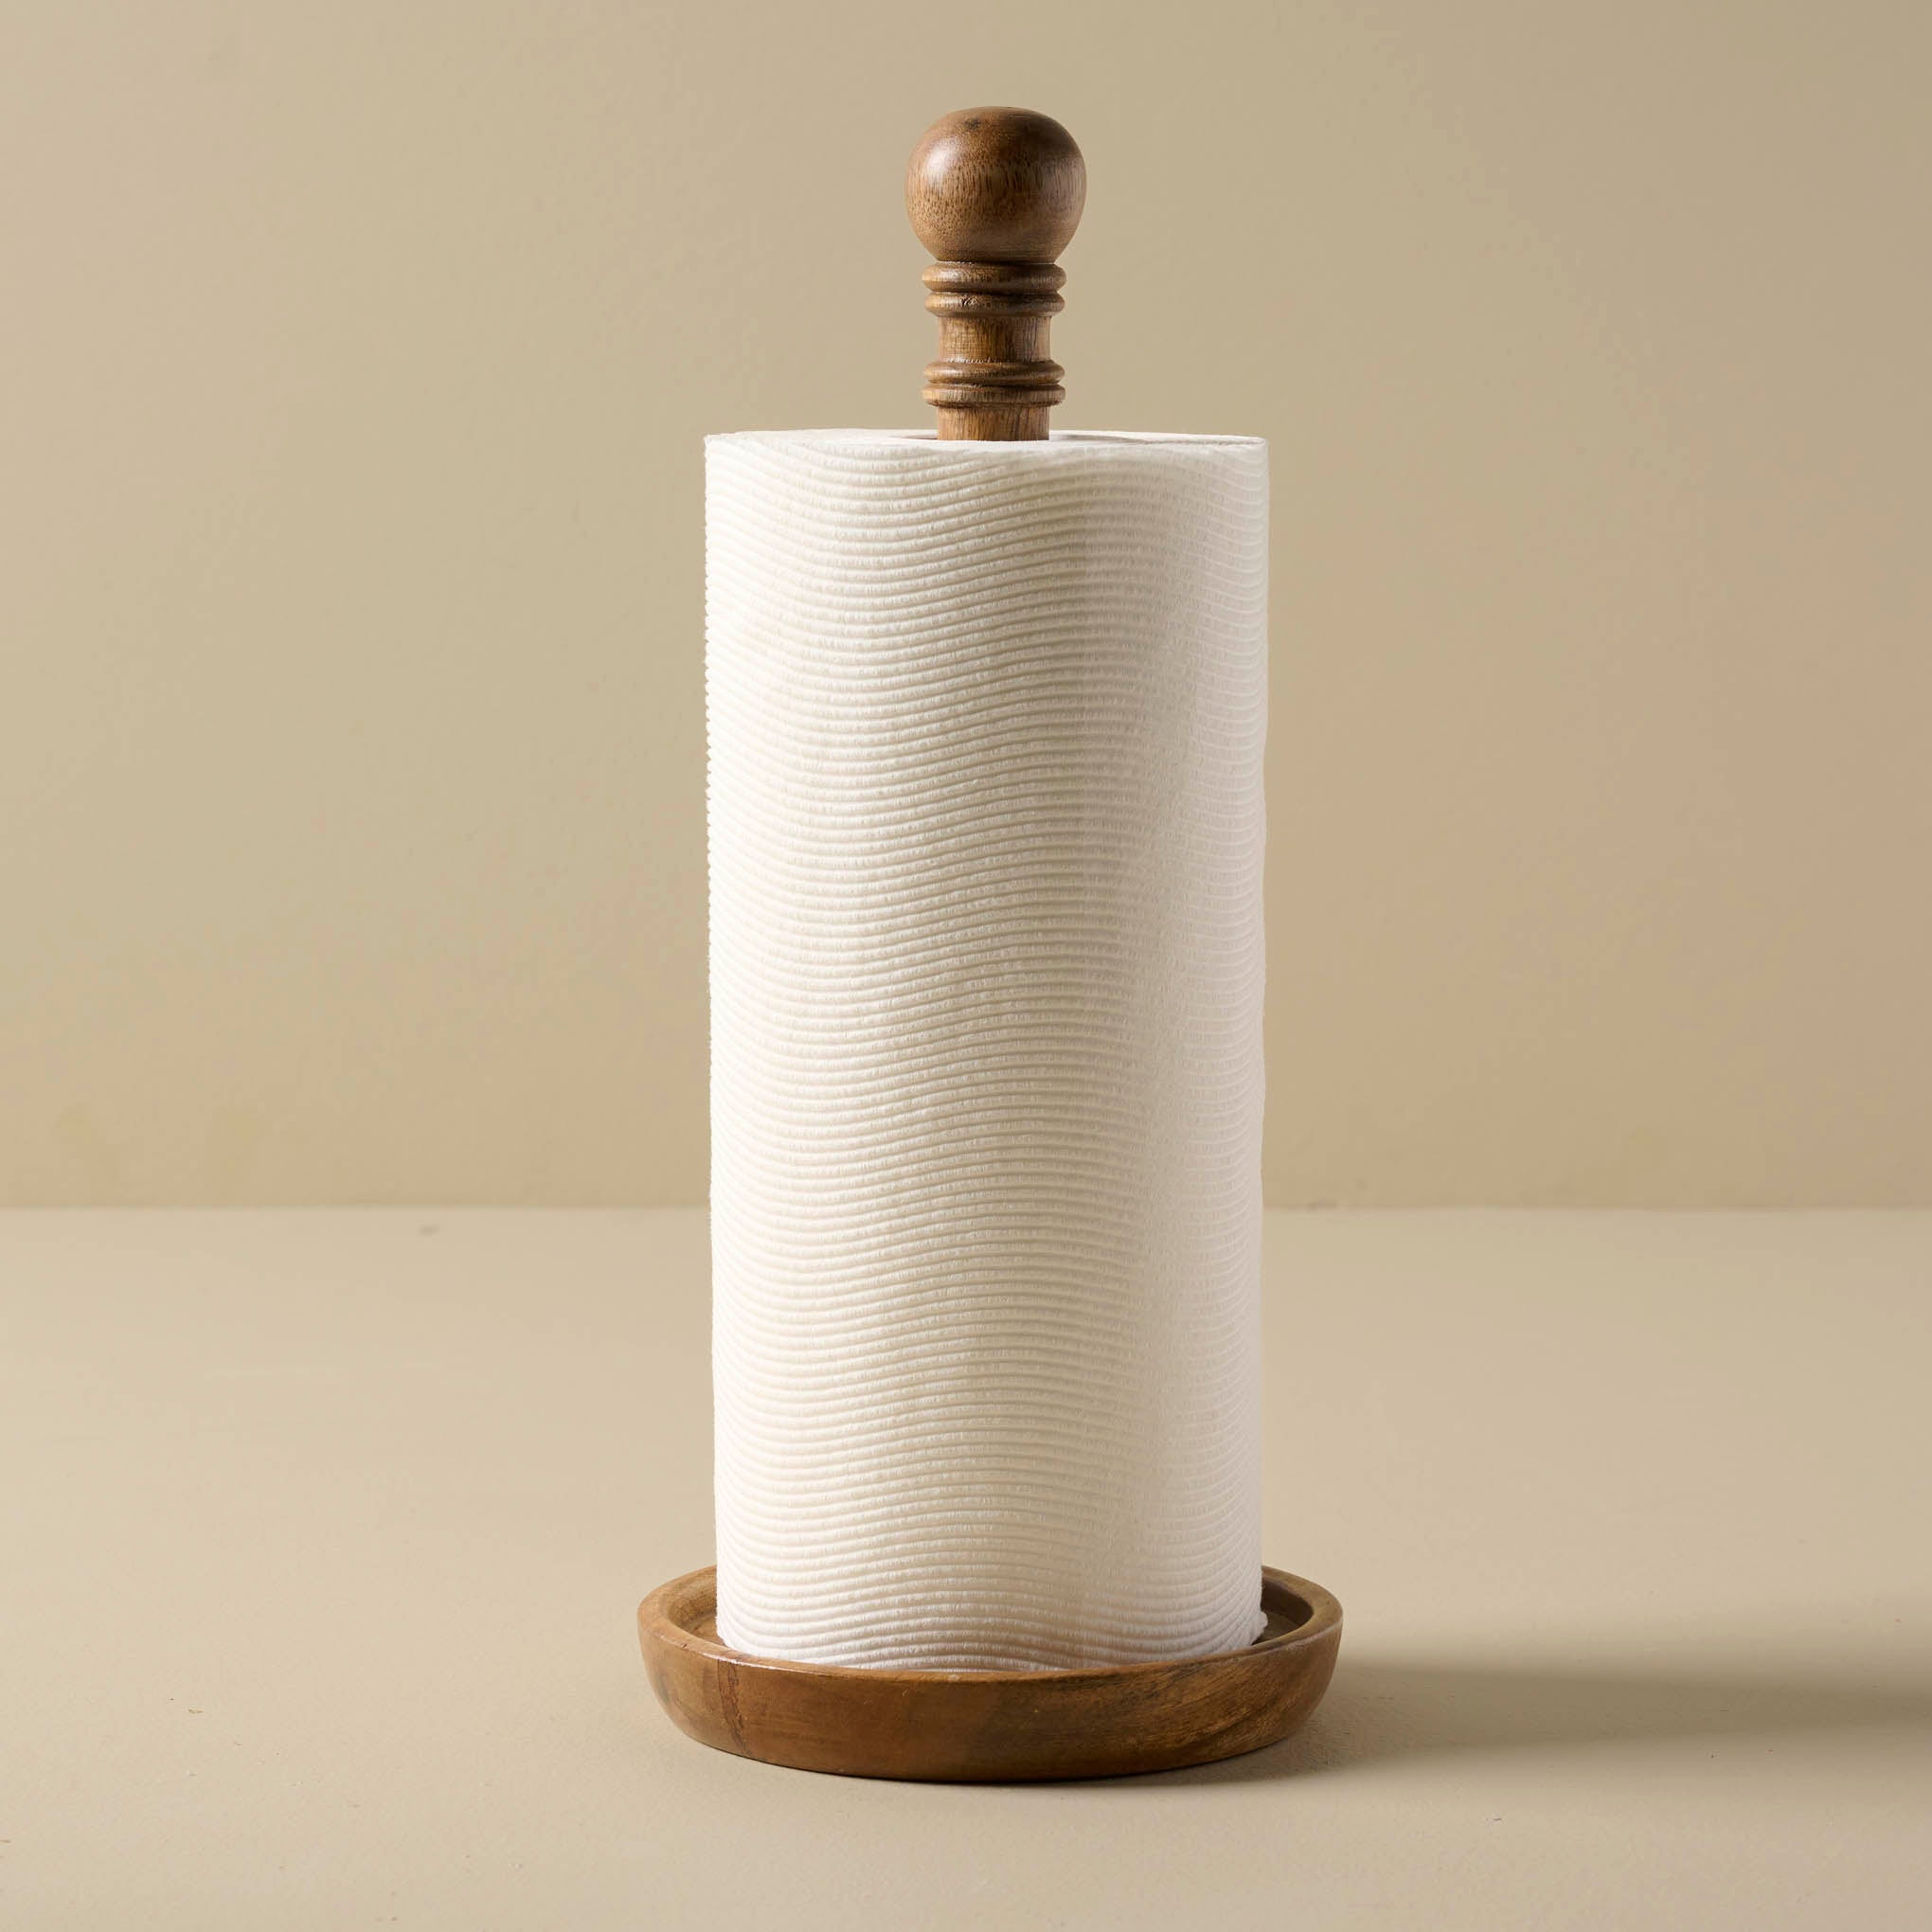 Antiqued Wood Paper Towel Holder with a roll of paper towel on it